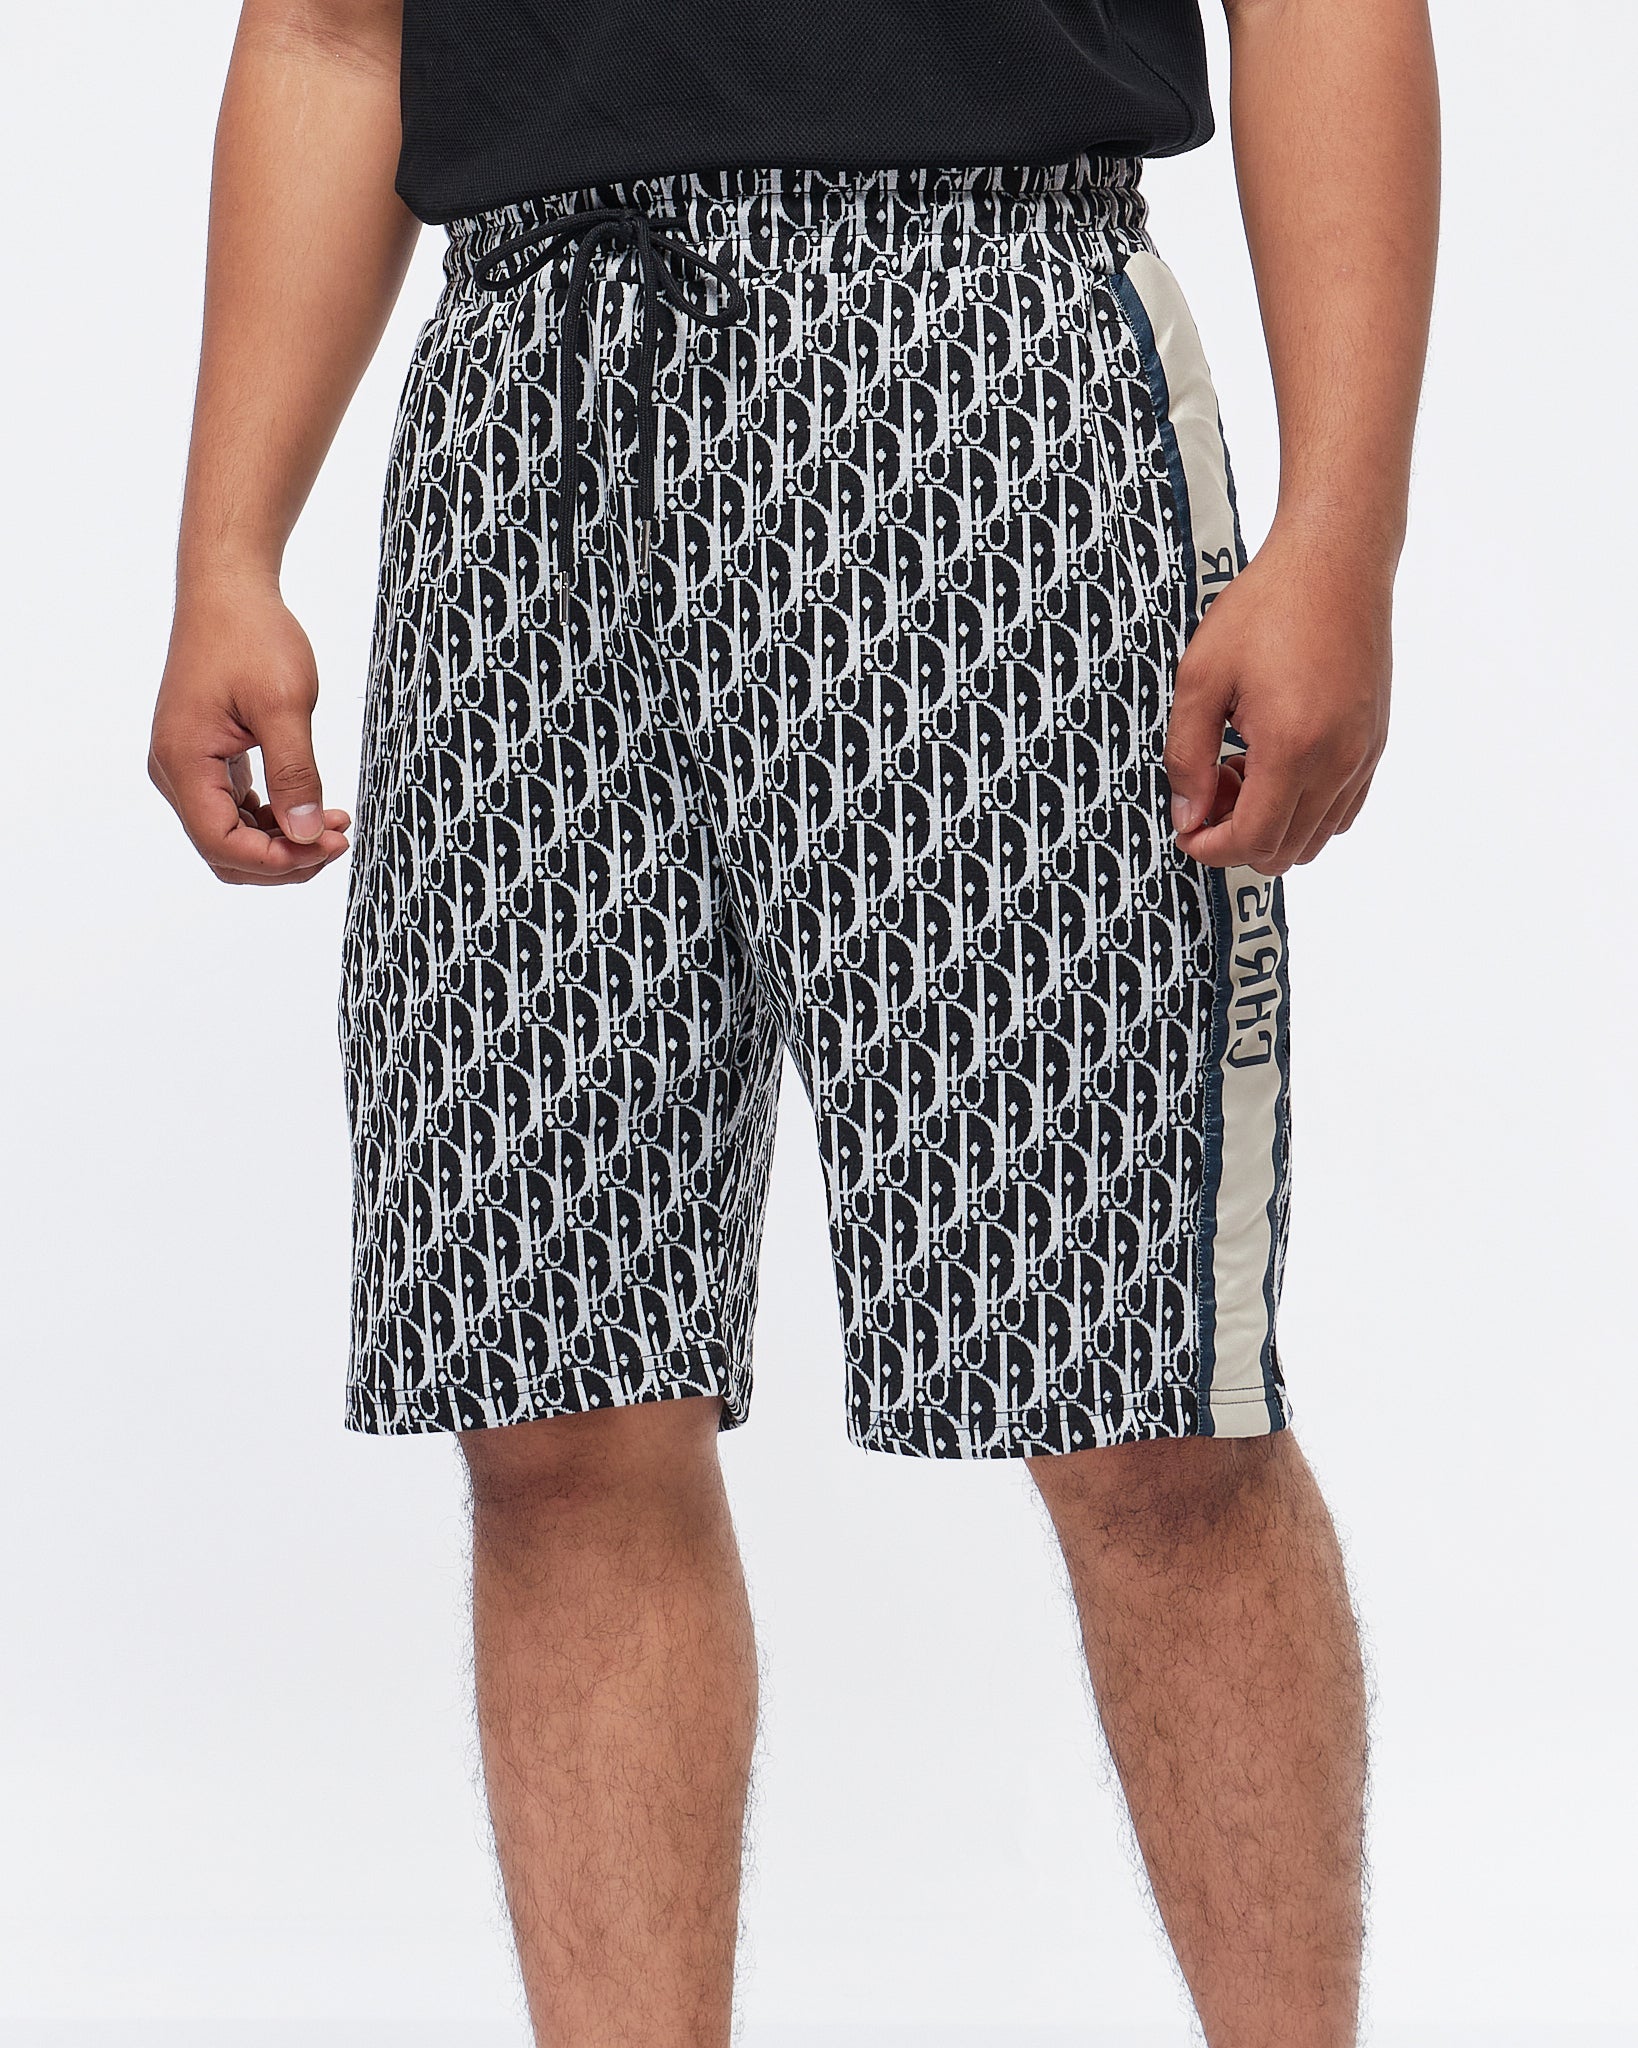 MOI OUTFIT-Side Striped Logo Over Printed Men Shorts 18.90